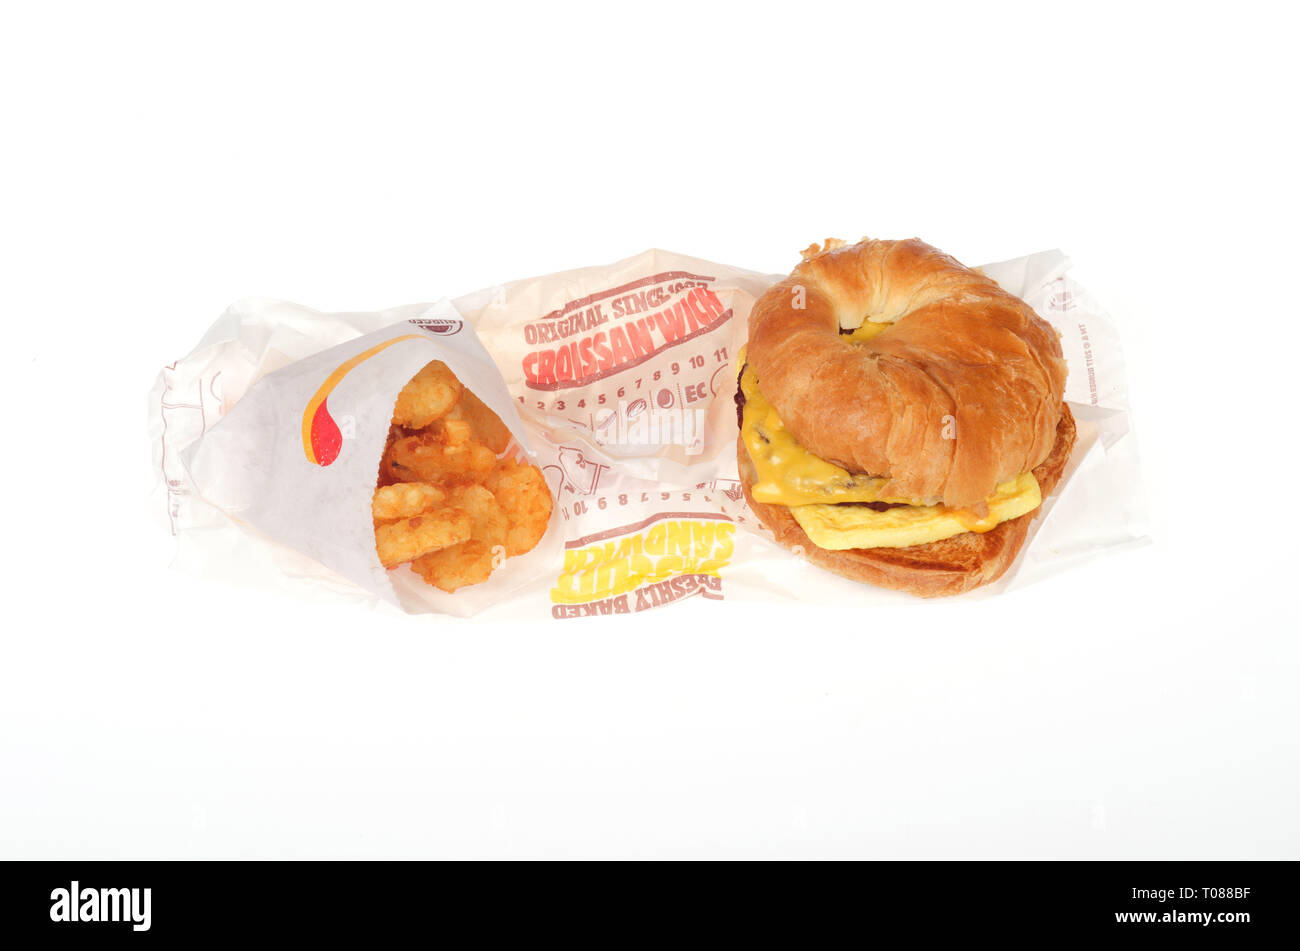 Burger King Sausage, Egg  and Cheese Croissan’wich and hash browns with wrappers on white background Stock Photo